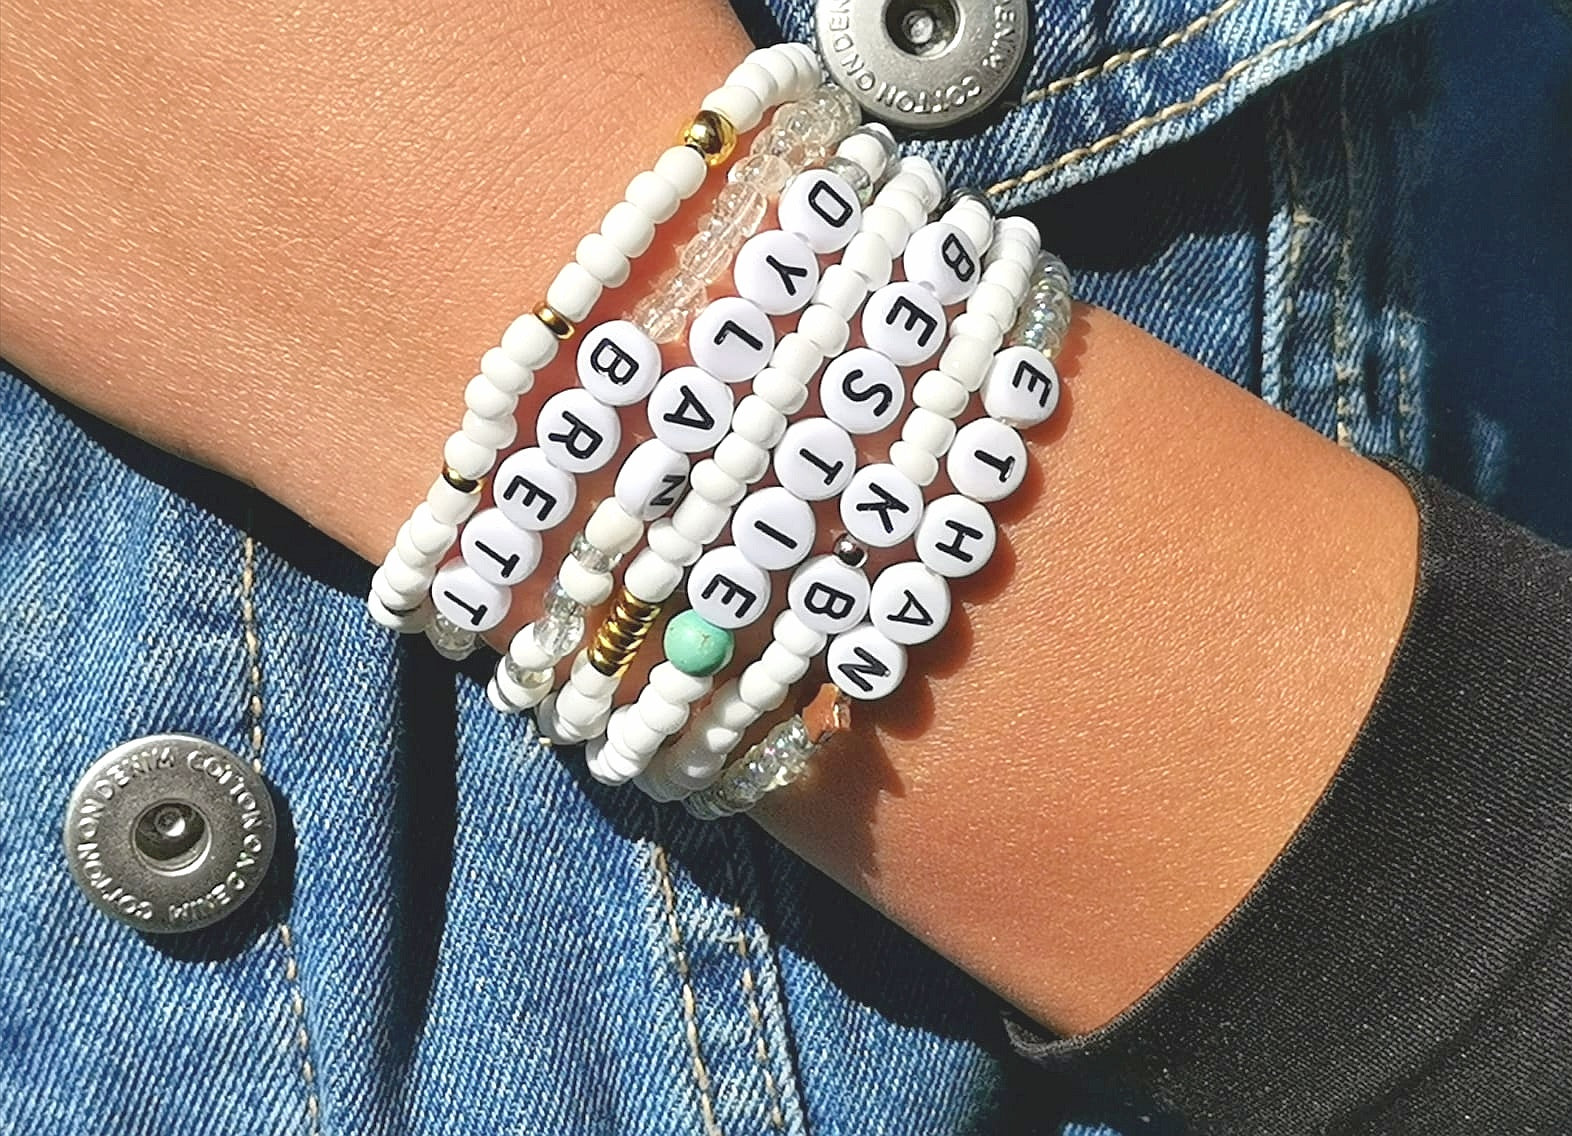 Personalised Beaded Letter Bracelets- Create your own